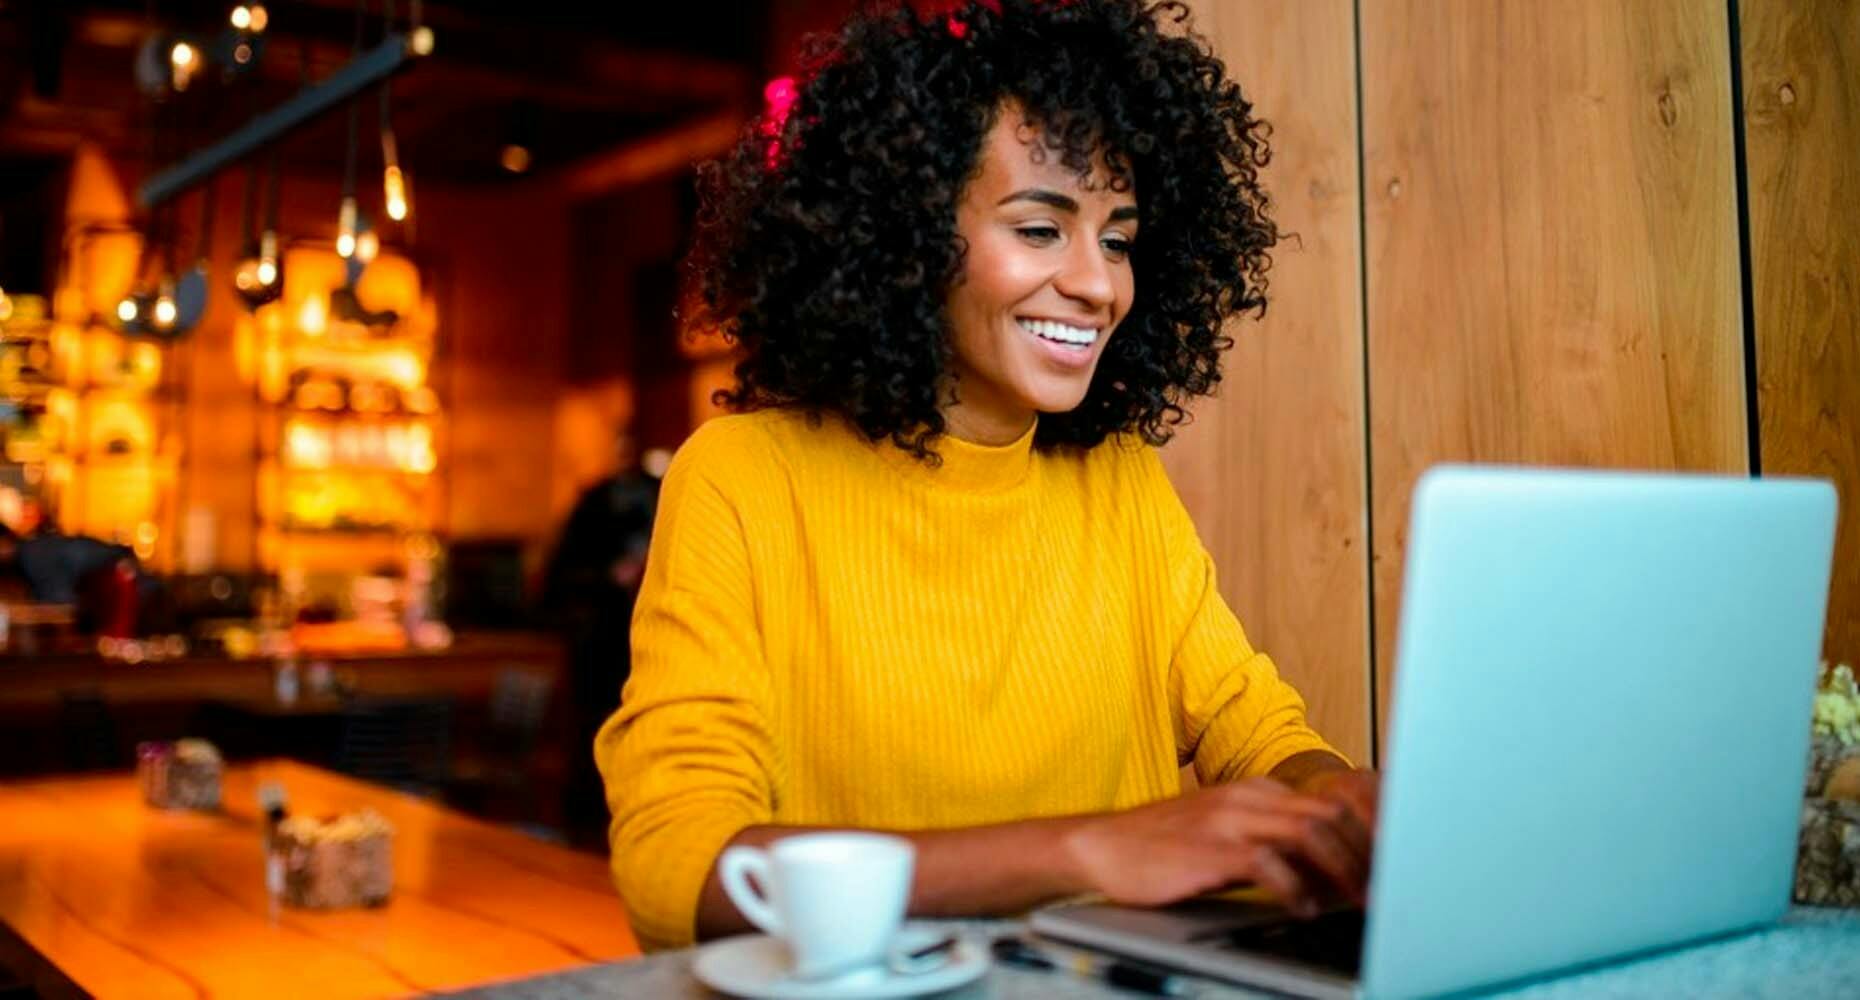 Smiling woman on a laptop in a bar